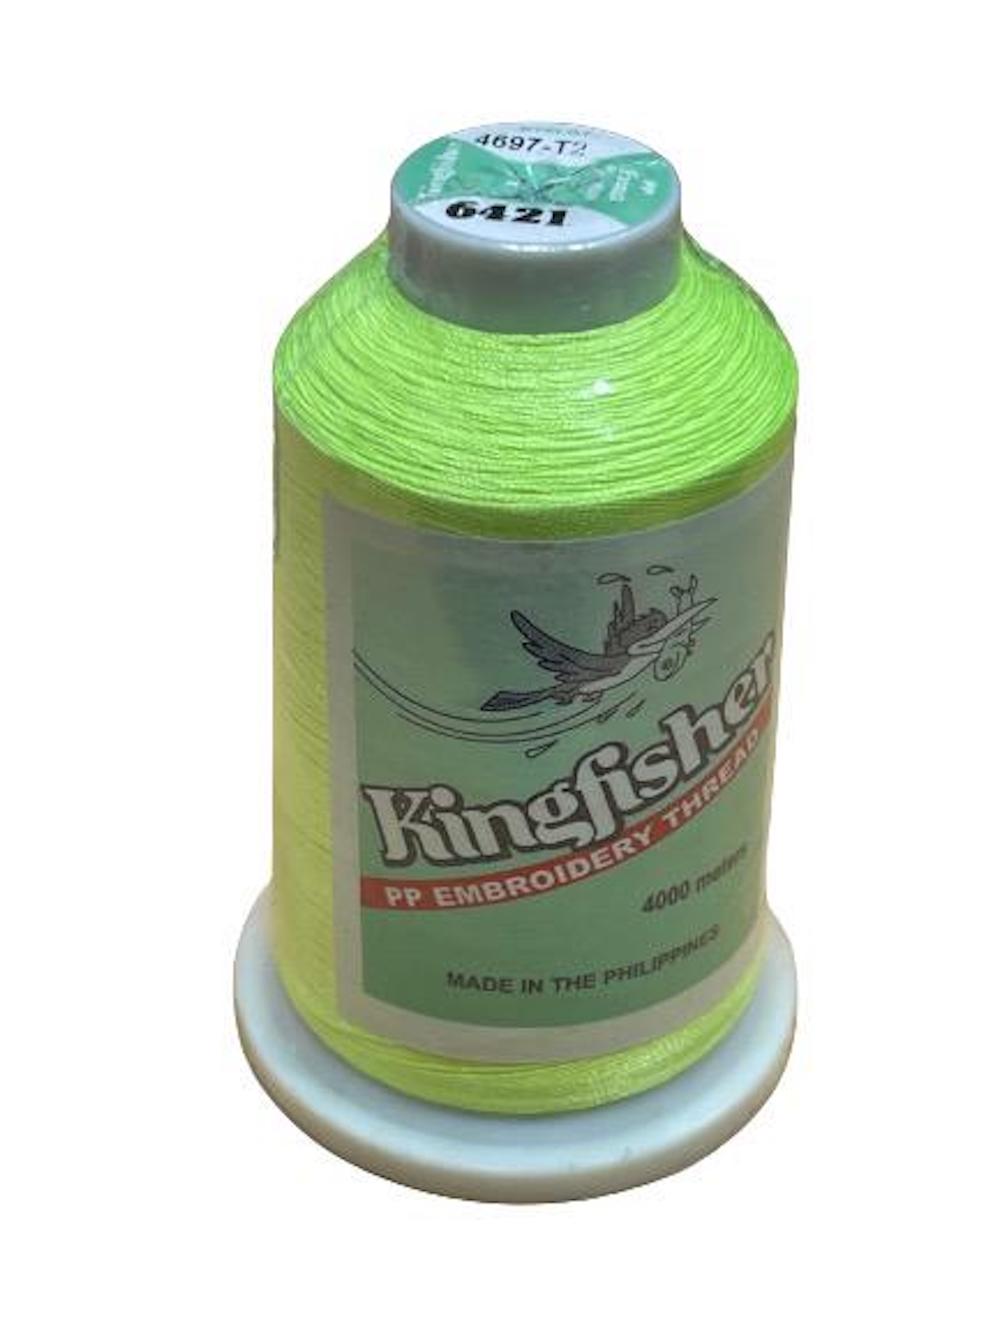 King Fisher Embroidery Thread 4000m 6421 - MY SEWING MALL